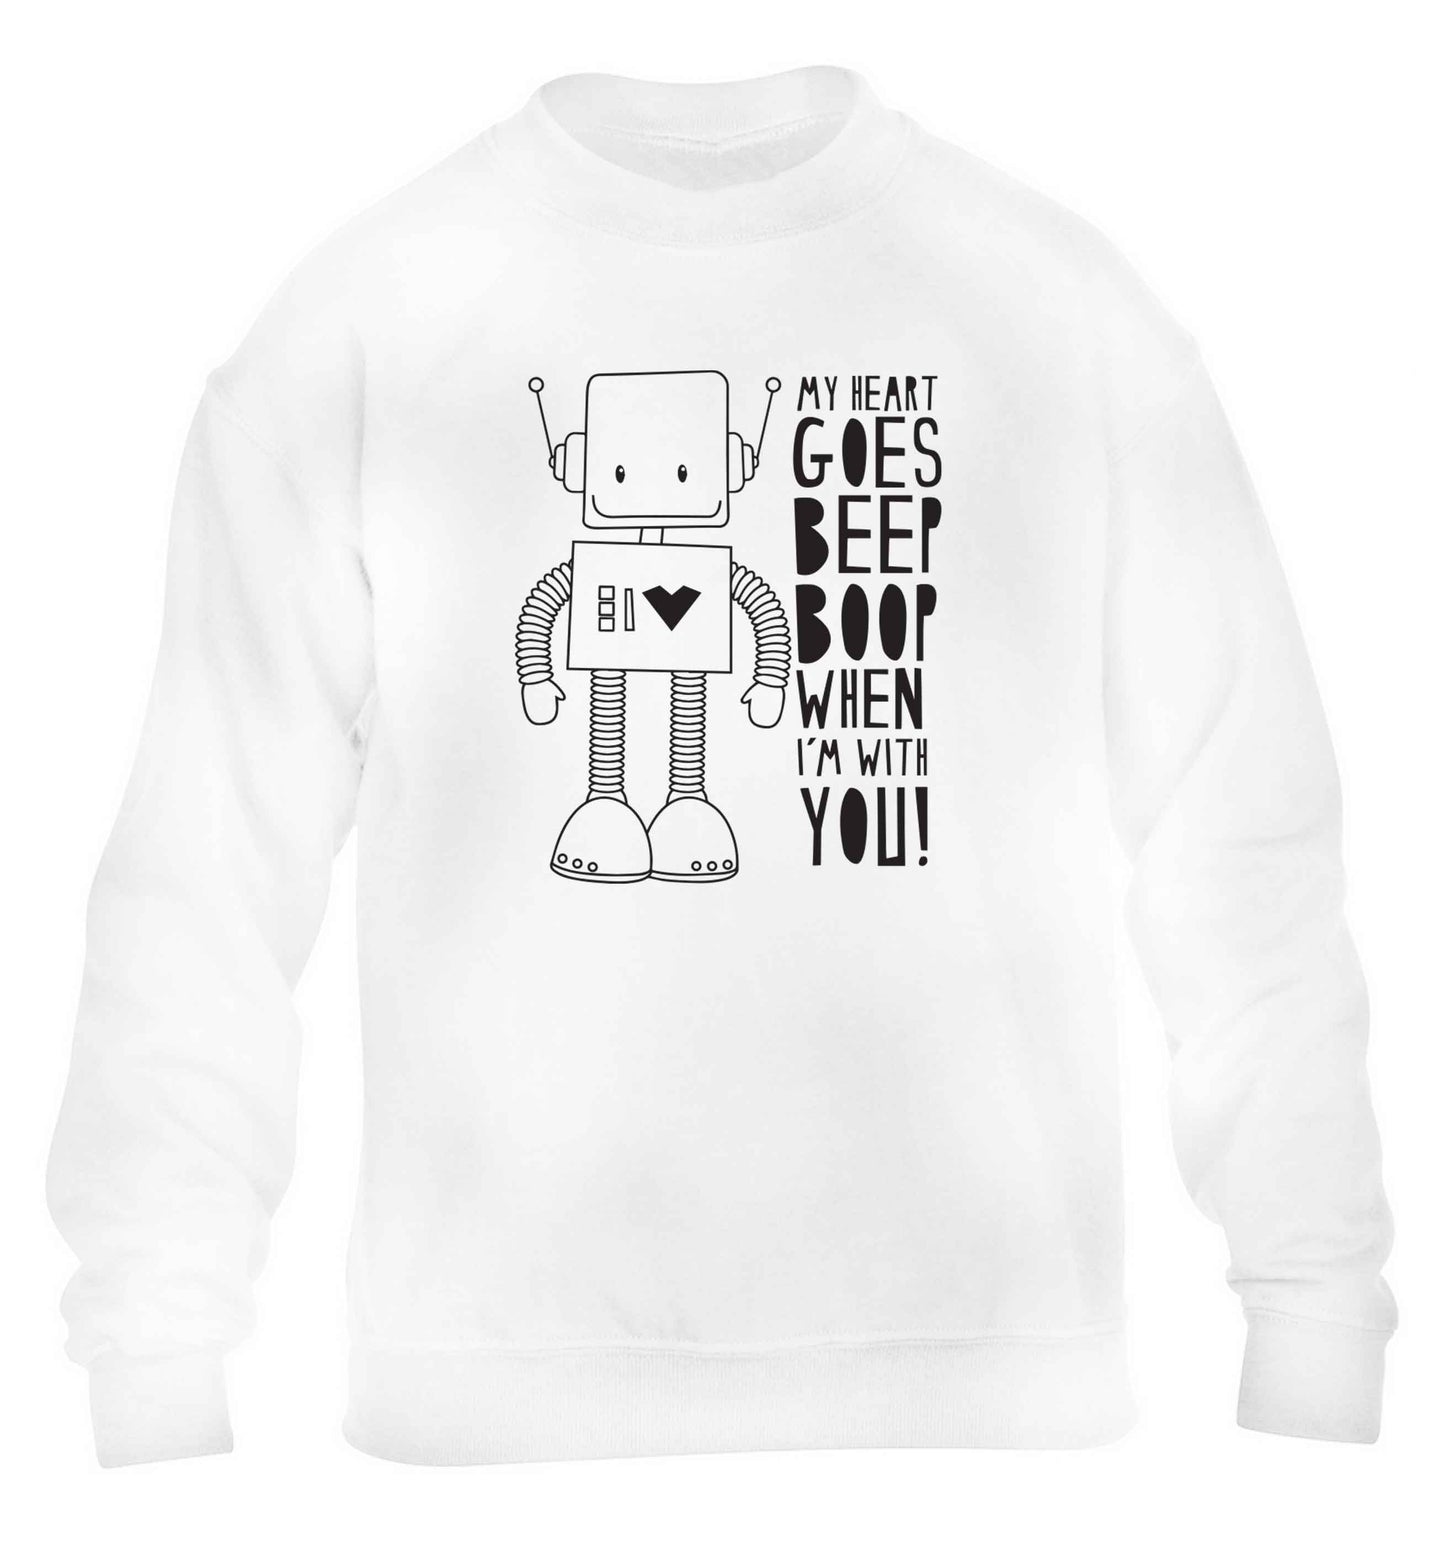 My heart goes beep boop when I'm with you children's white sweater 12-13 Years